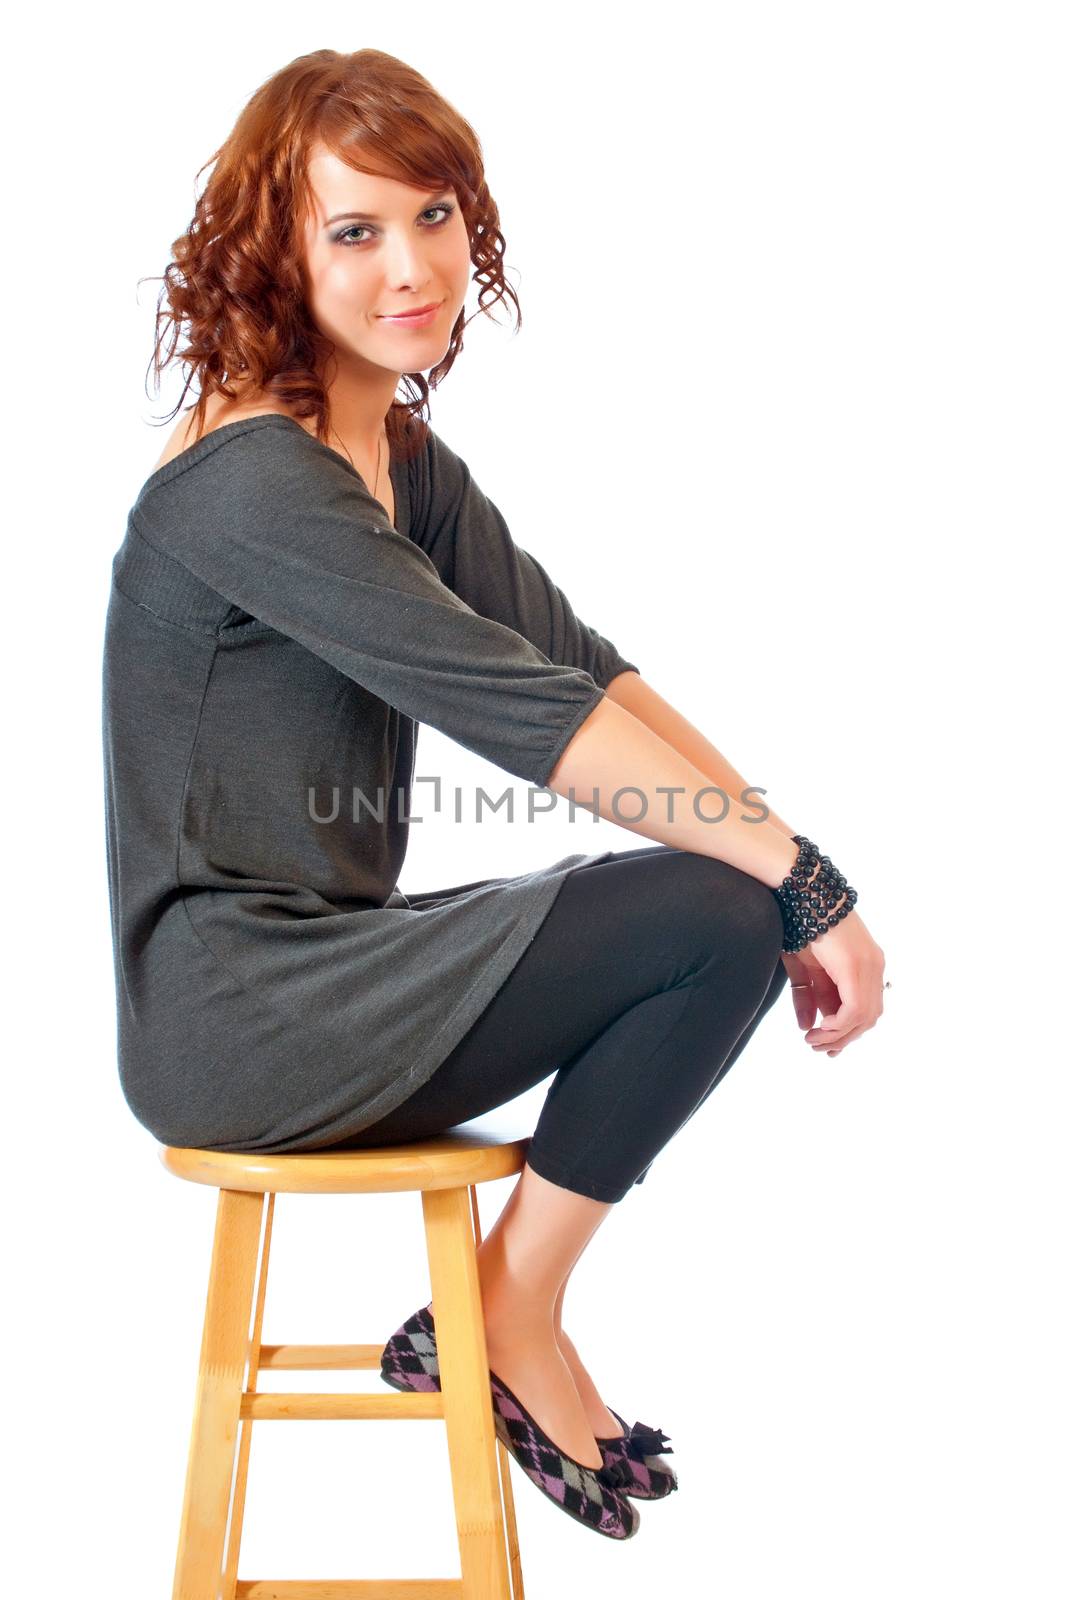 Beautiful young woman seated on a kitchen stool against a white background